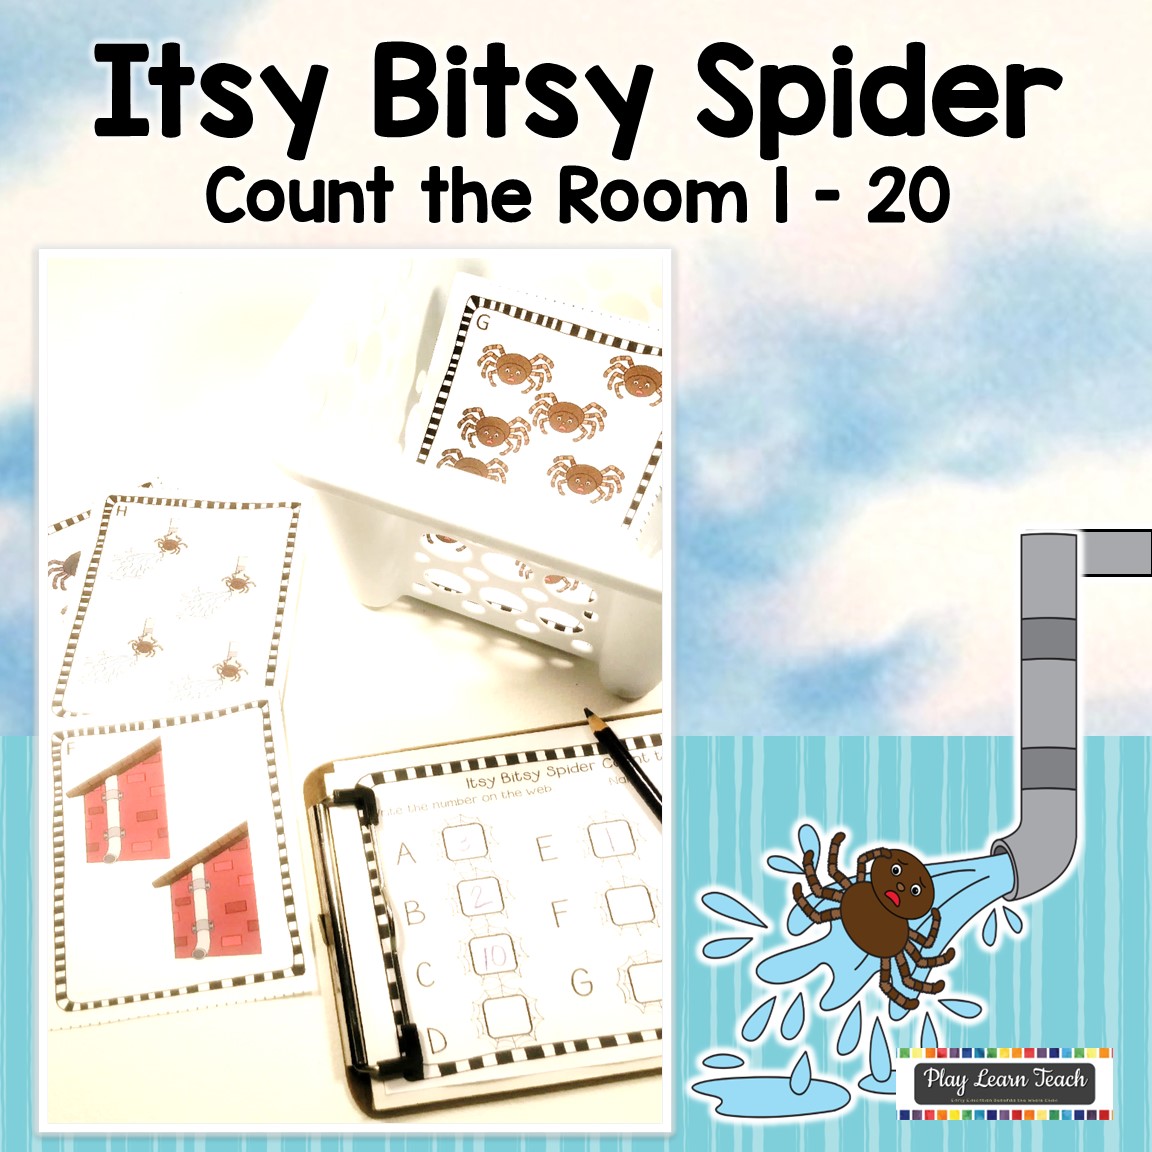 Itsy Bitsy Spider Count the Room 1 - 20